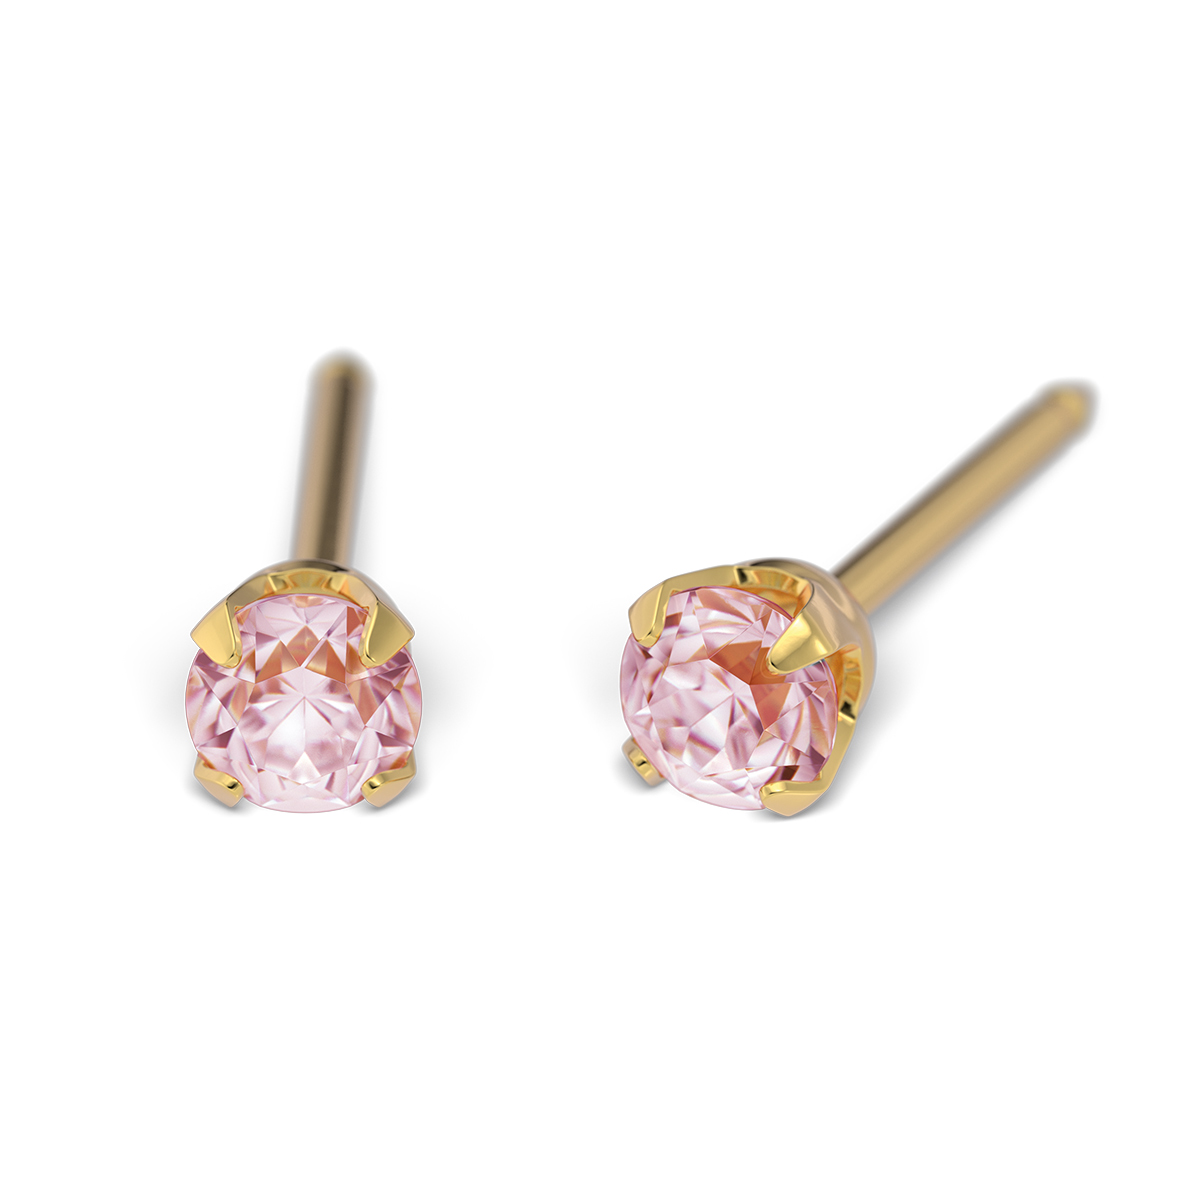 System 75 ear studs gold plated